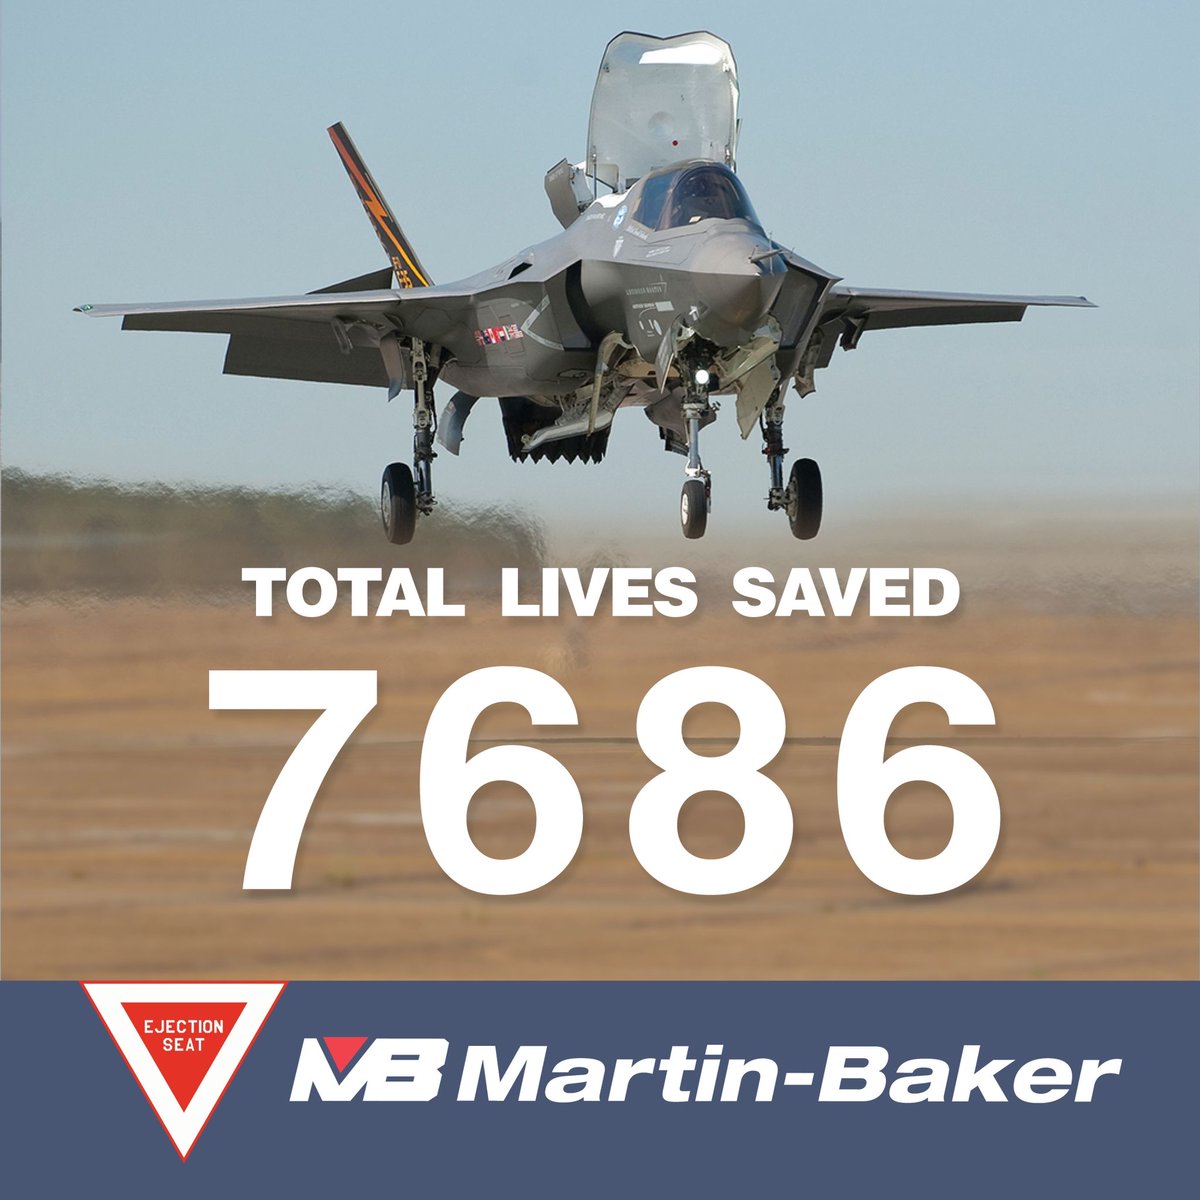 Yesterday, a USAF F-35B aircraft crashed at Joint Reserve Base, Fort Worth. The pilot ejected successfully using the Martin-Baker US16E Ejection Seat.